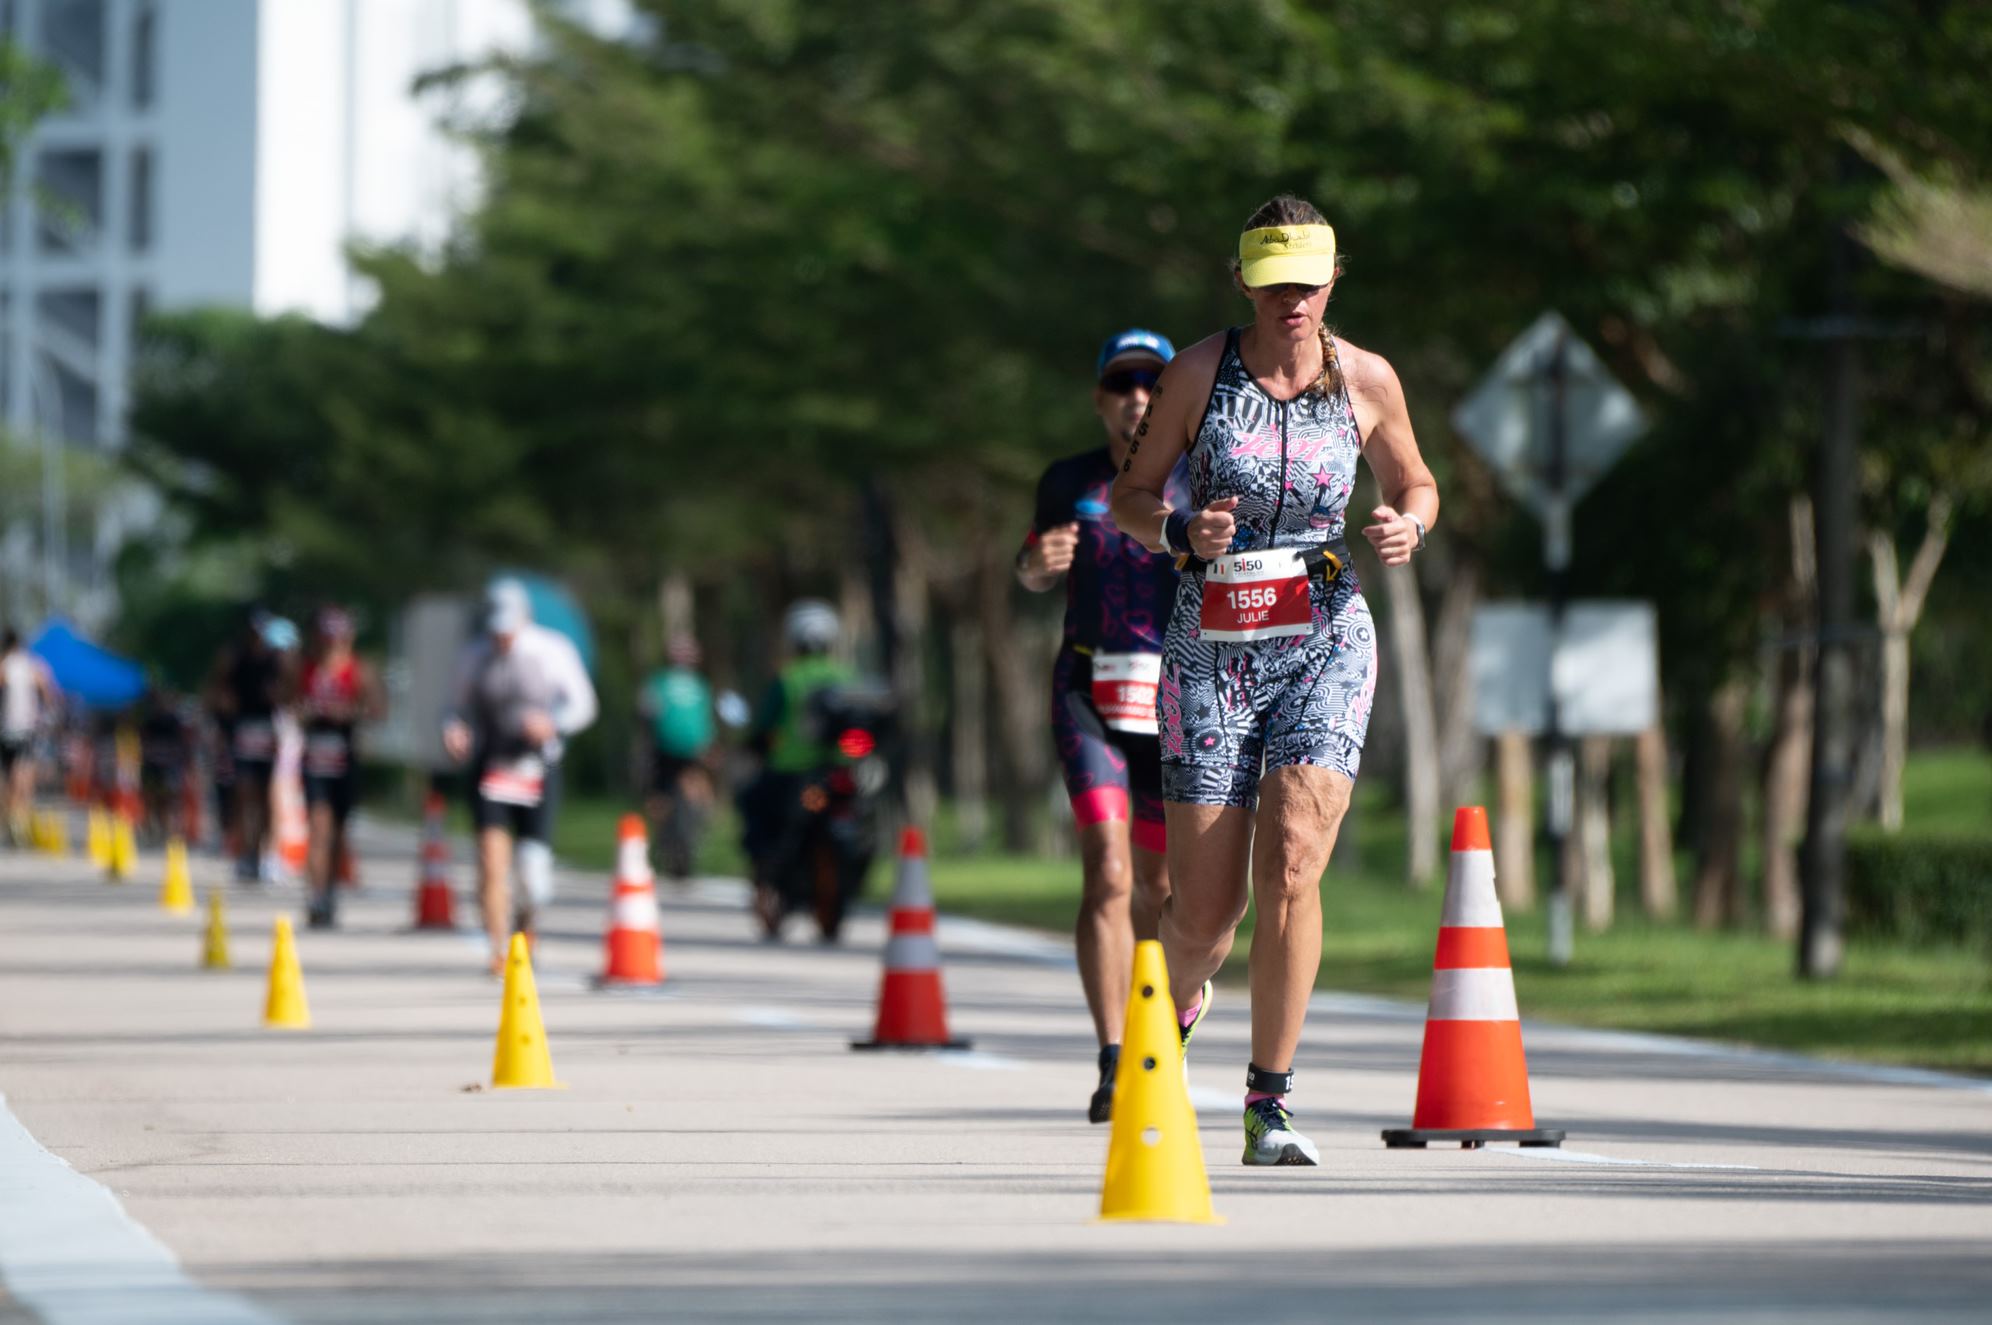 Interview with Singapore's First Full-Time Triathlete: Choo Ling